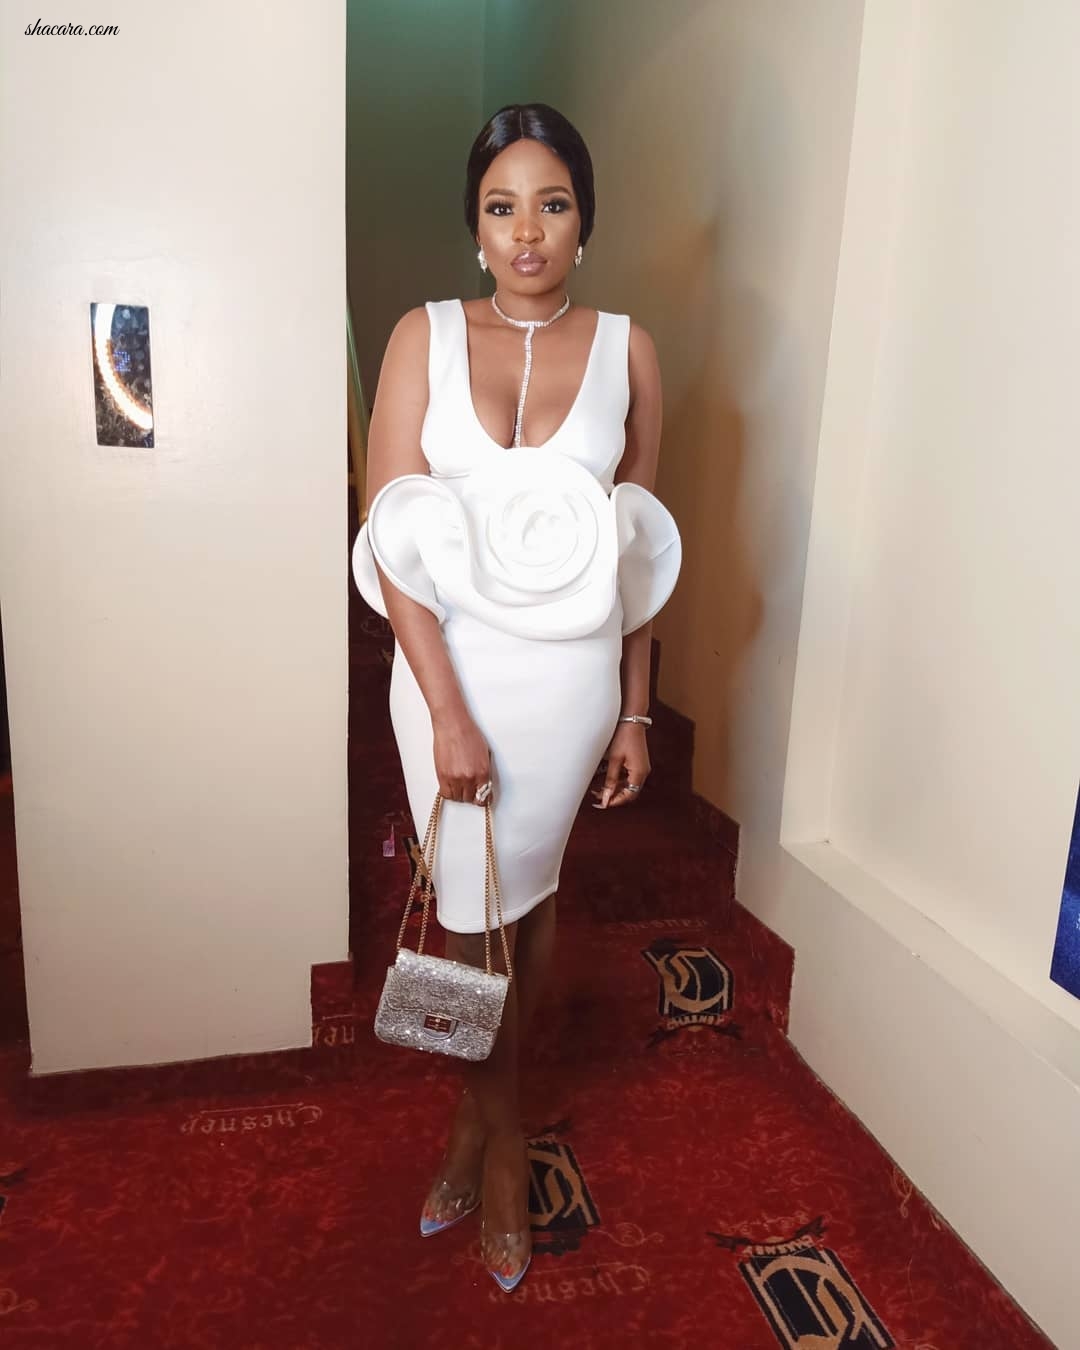 Pepper Dem Slay! Here’s What These Ex-Housemates Wore To The #BBNaija 2019 Winners Party